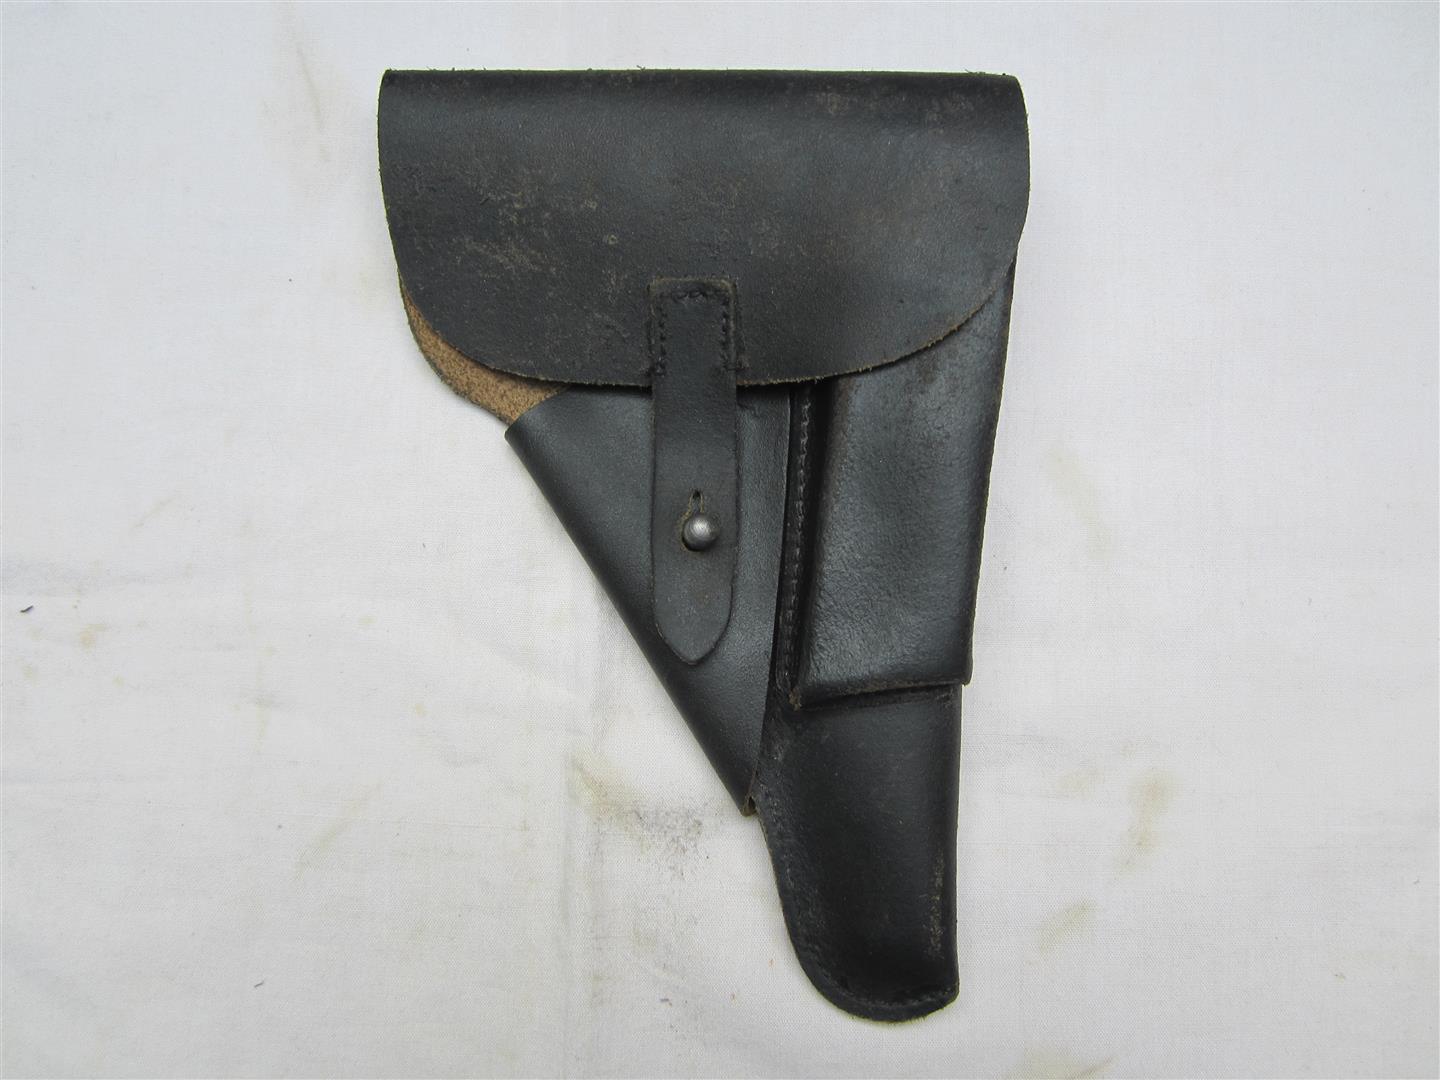 WW2 Walther P38 Holster, 1944